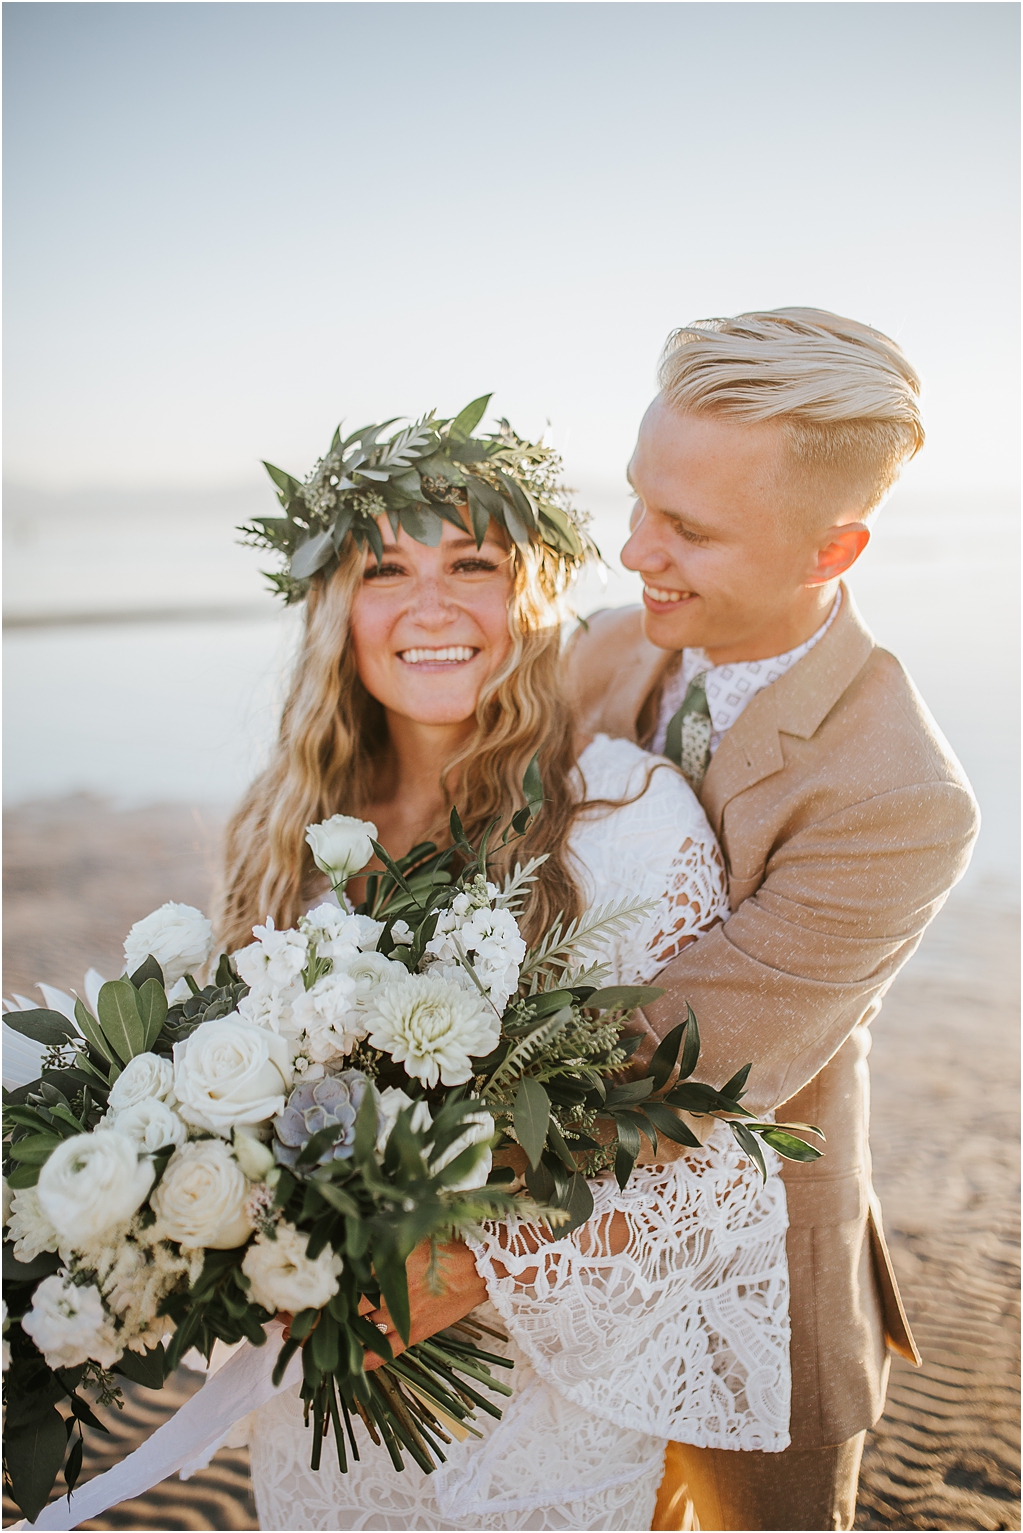 bride and groom for their boho bridals with groom hugging bride from behind and smiling at her as she looks at the camera and smiles, bride wearing a flower crown and a lace bohemian wedding dress with a large white rose bouquet